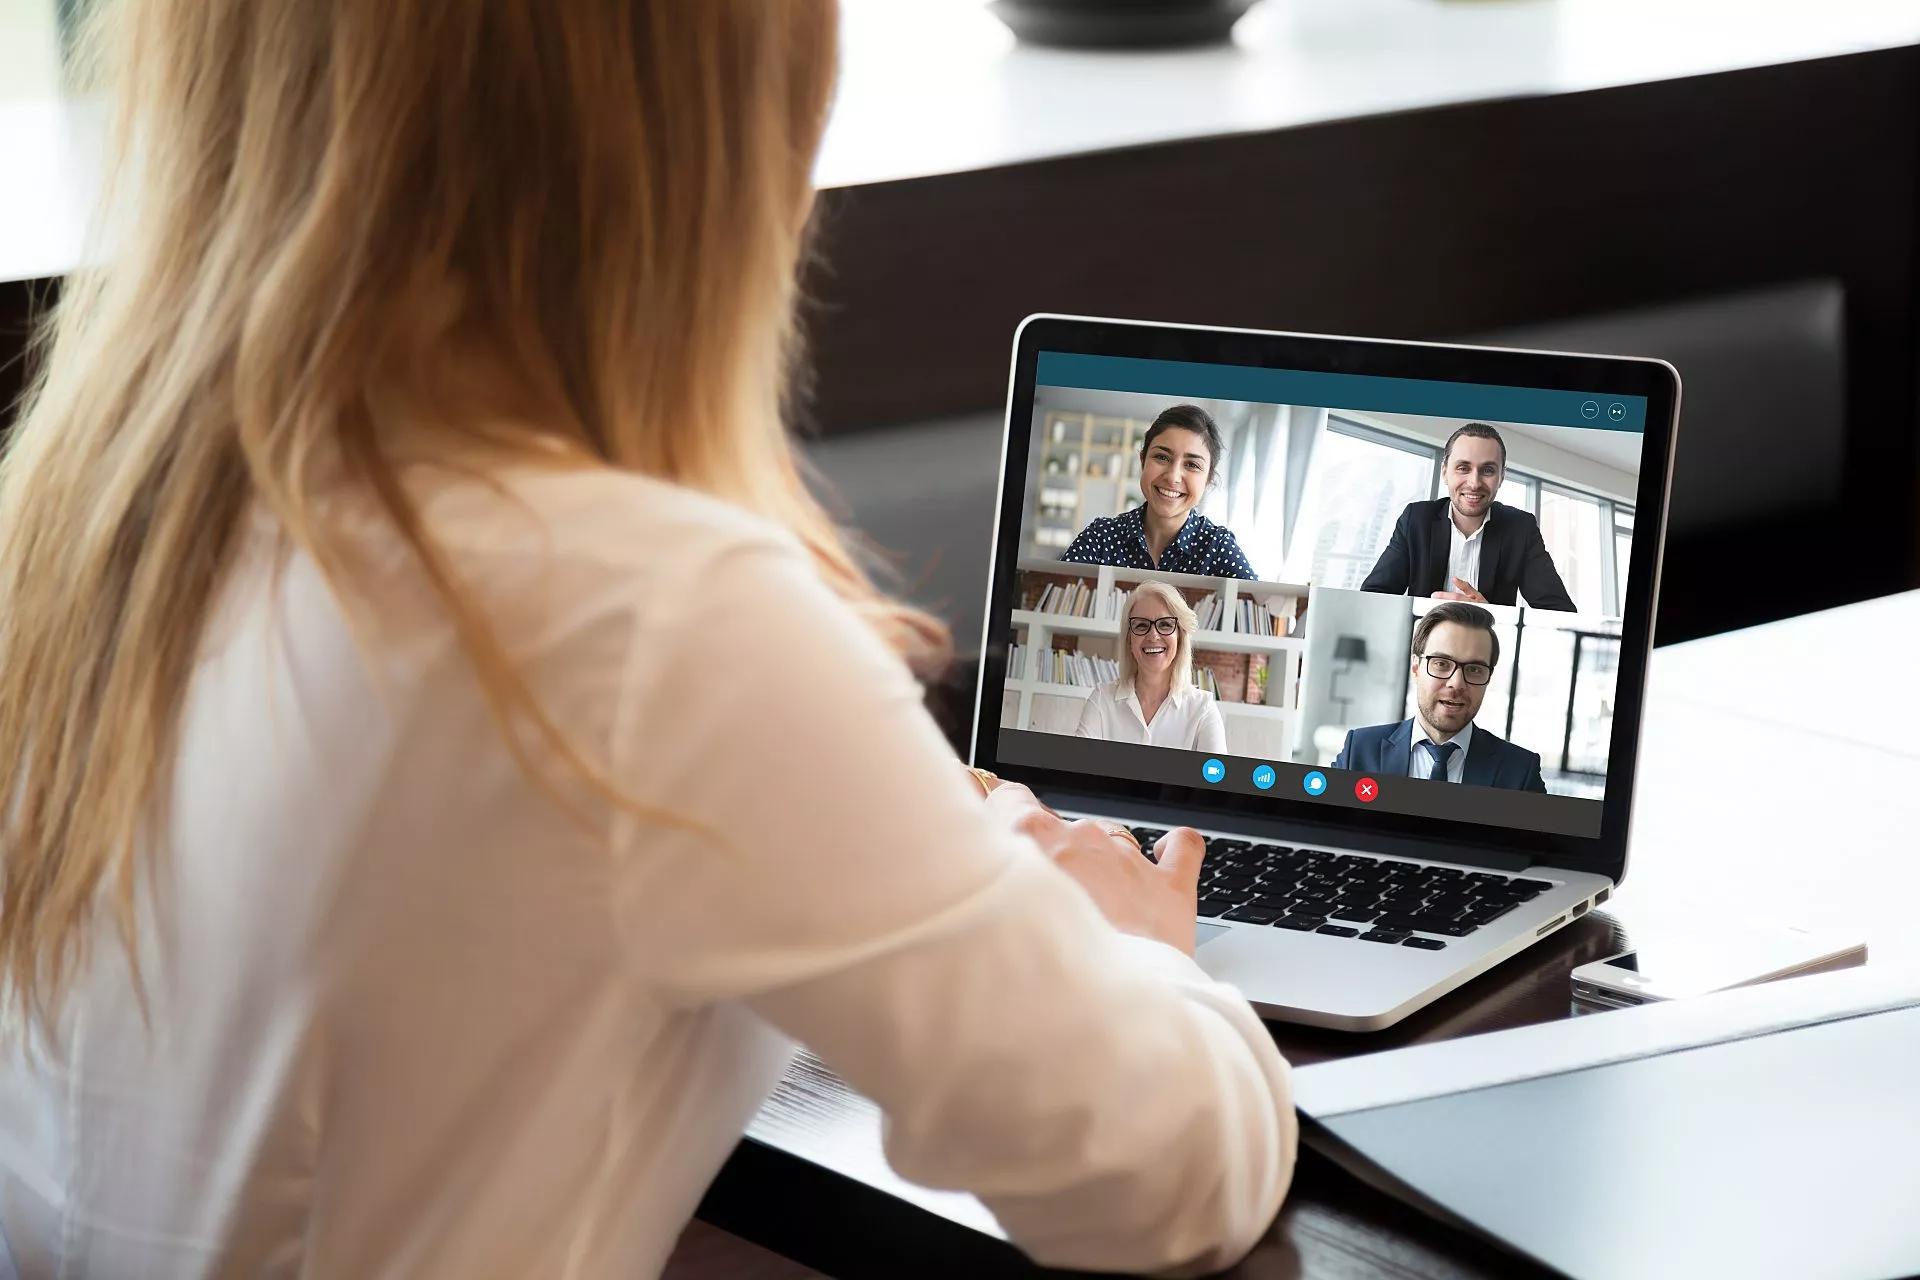 An executive working in the field connects with colleagues through videoconference